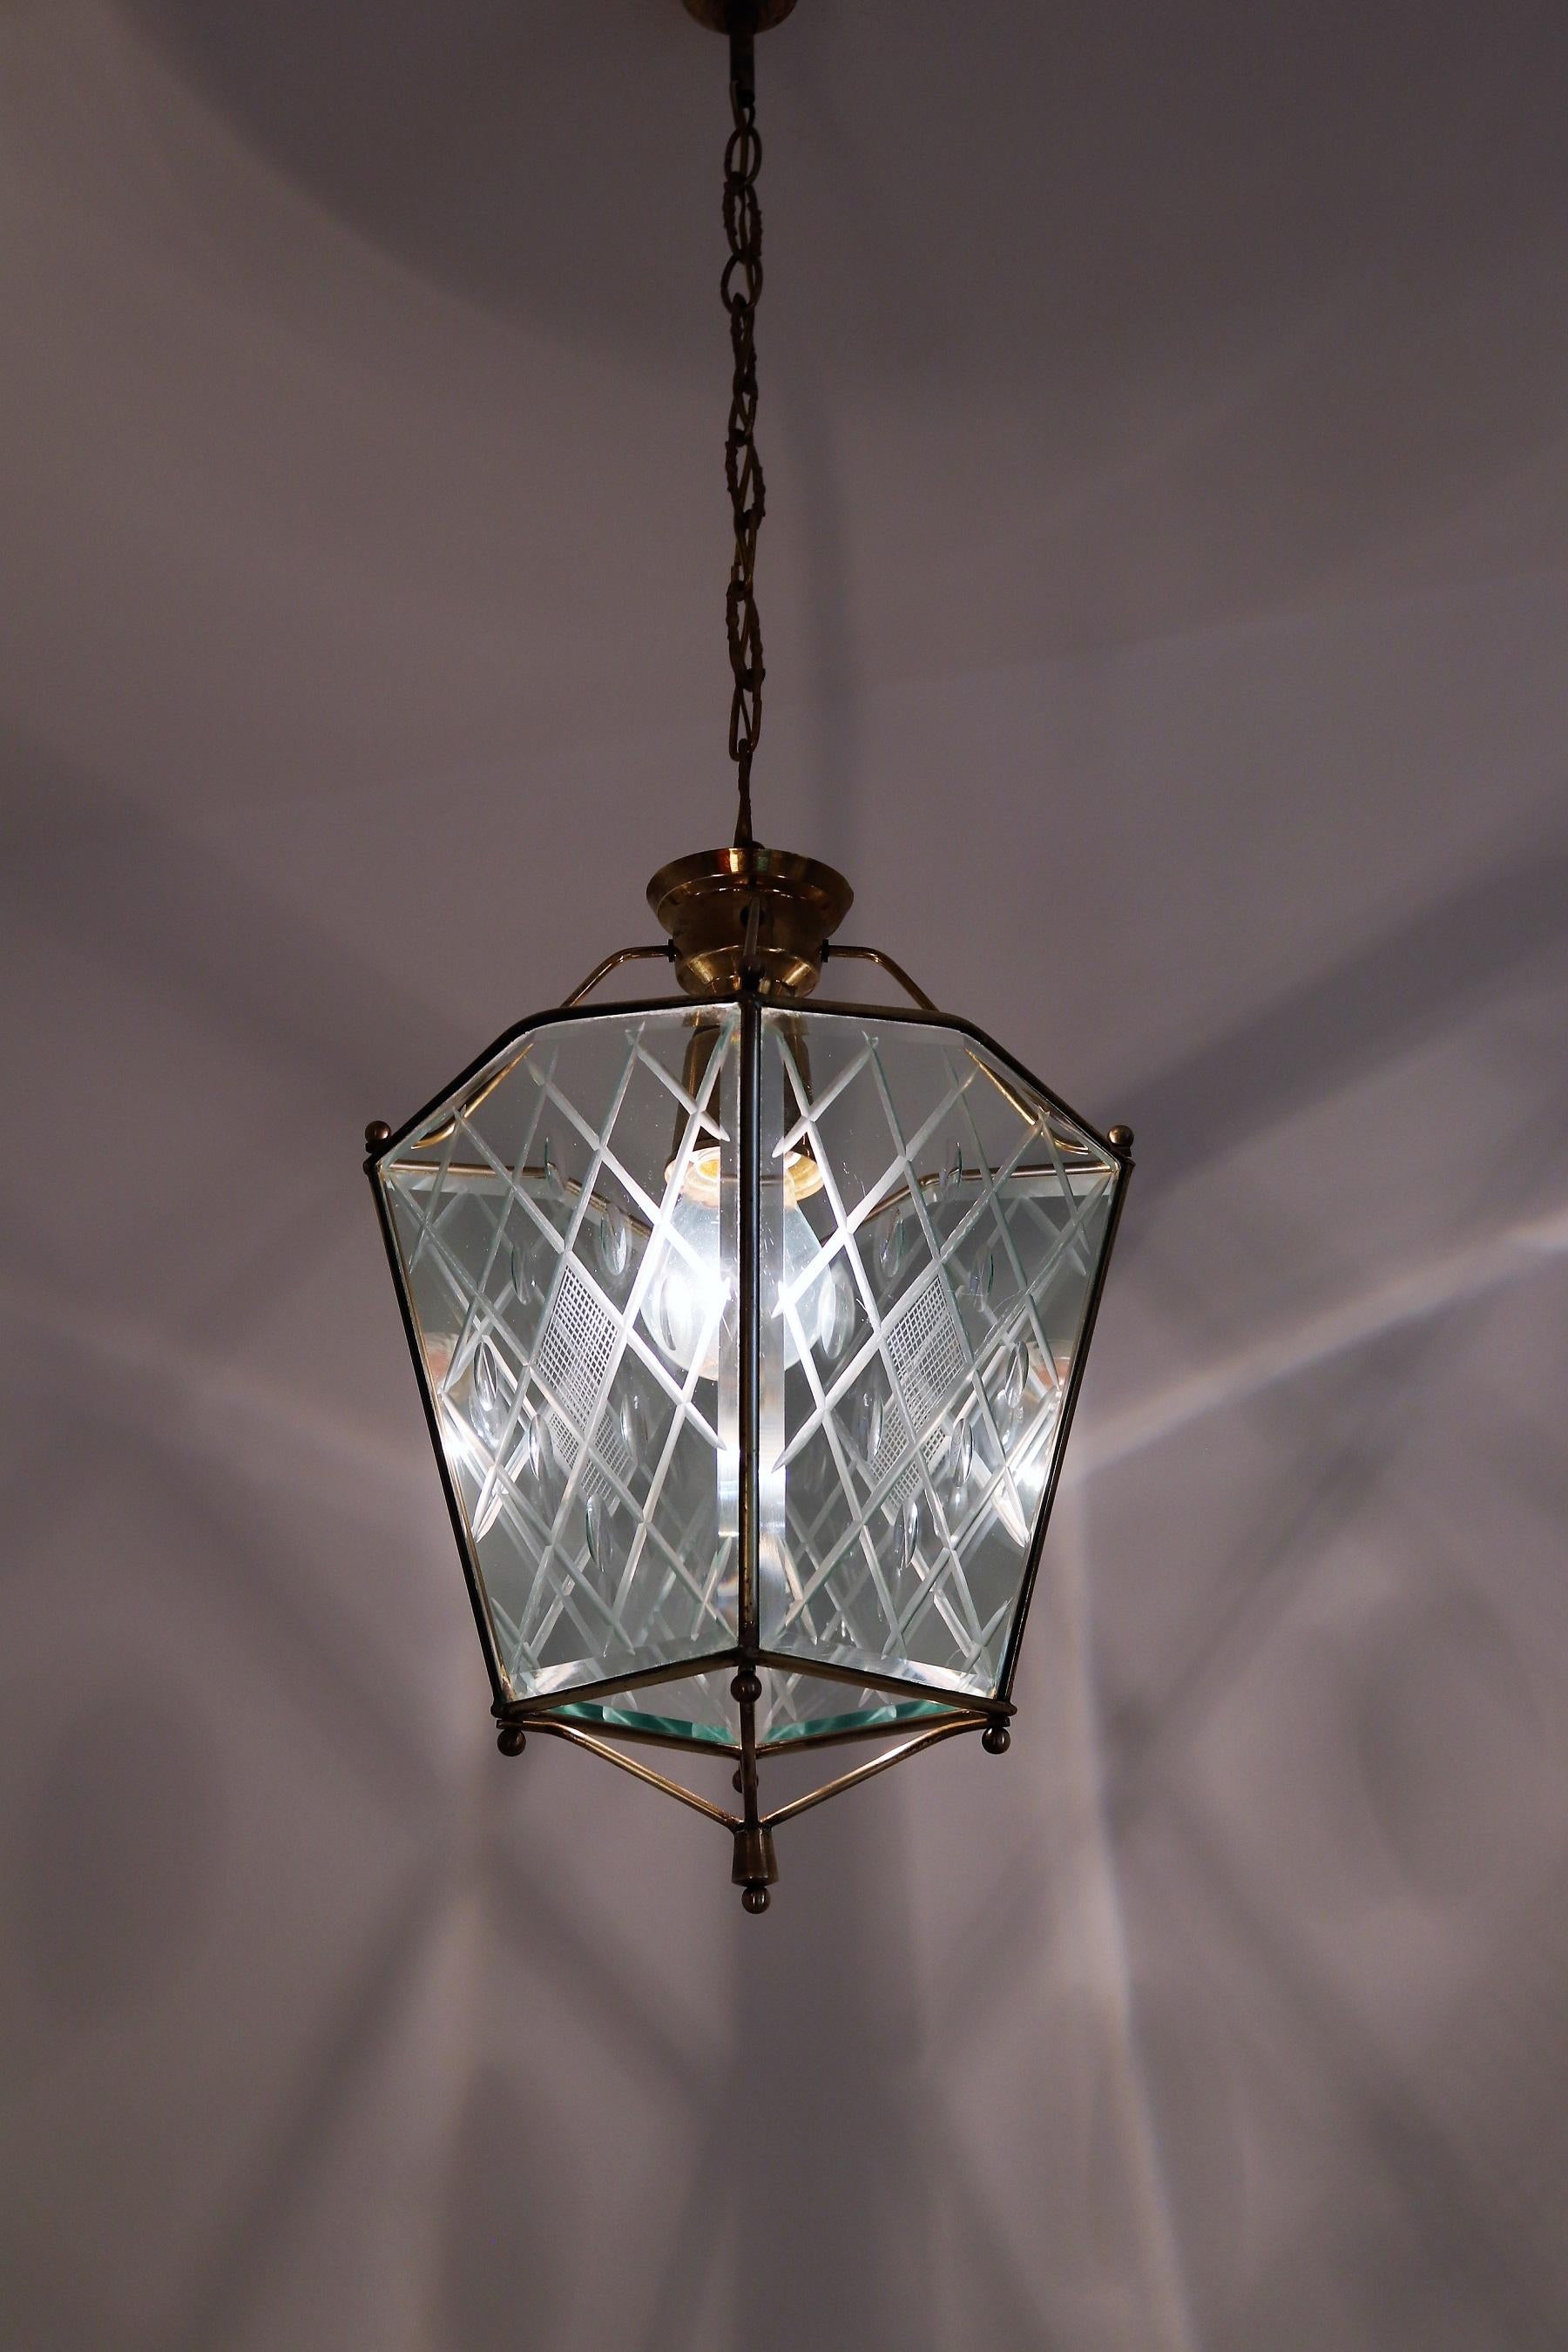 Gorgeous pendant lamp or lantern made of beautifully cut glass and brass details.
Made in Italy in the 1950s.
Perfect for a small room, bathroom or an entryway.
The cut glass is much better to see in person and the brass has fantastic patina from